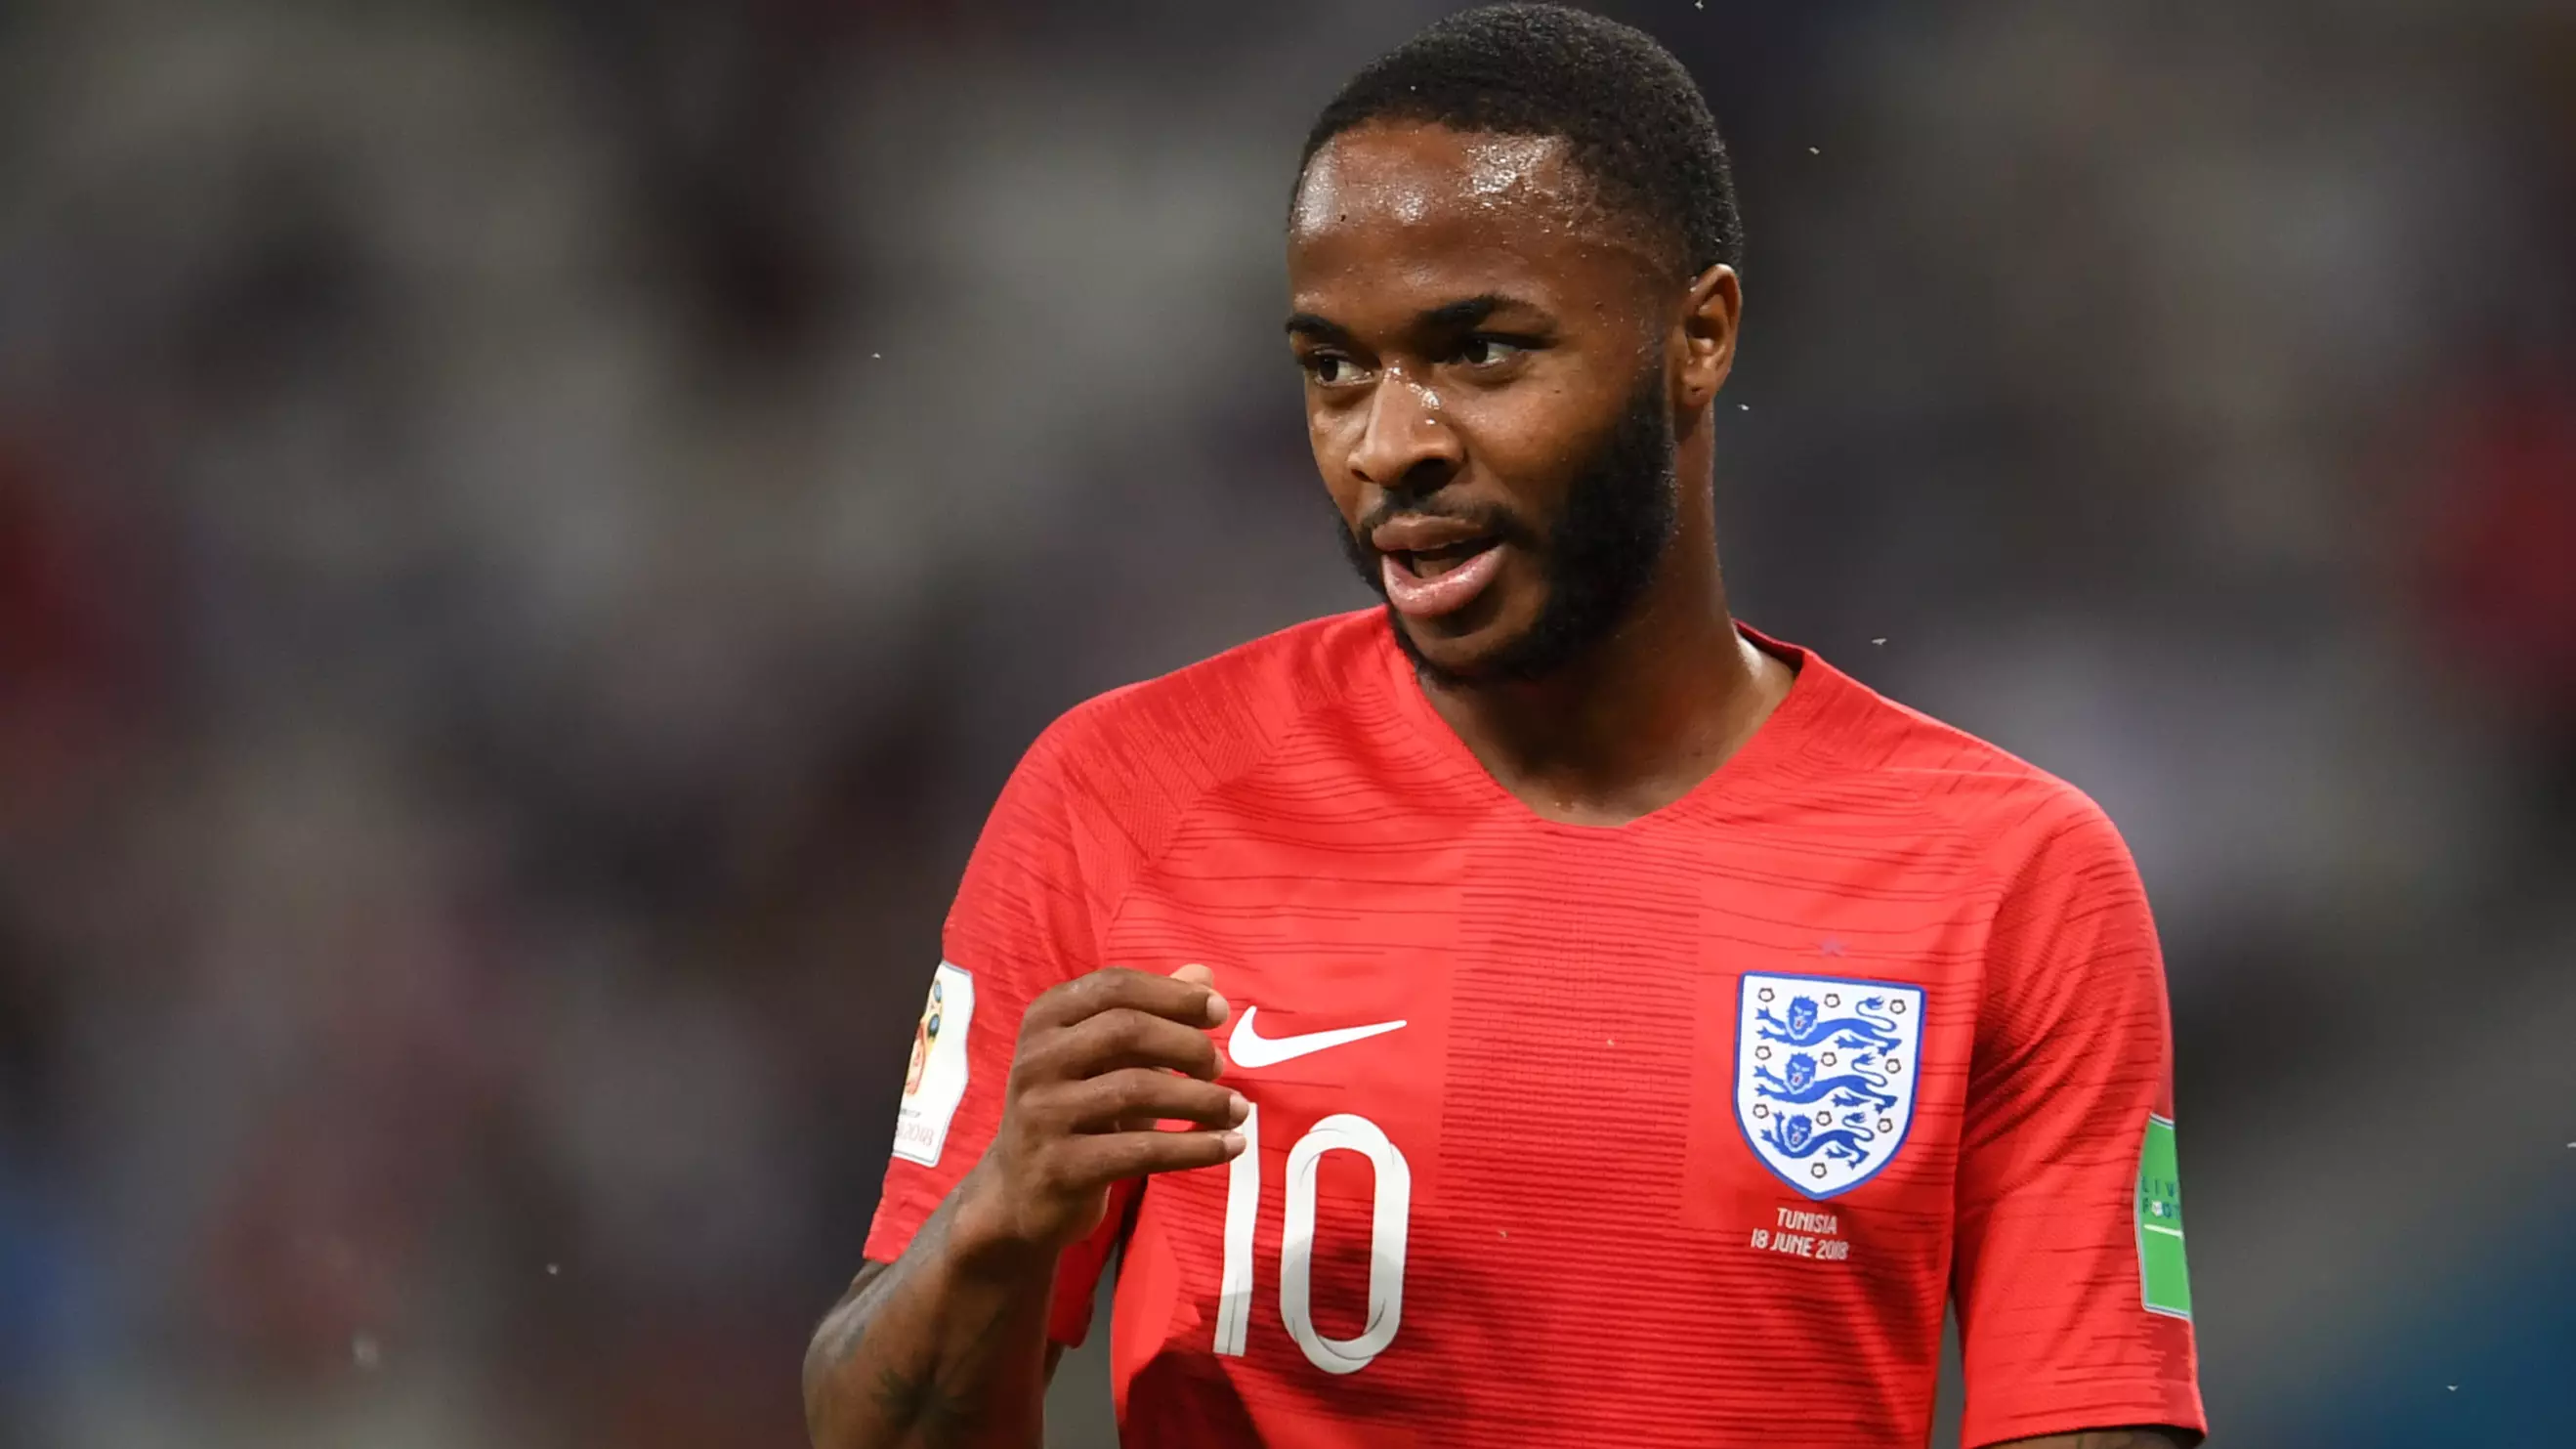 Raheem Sterling Opens Up On Tabloid Criticism And Living His Dream